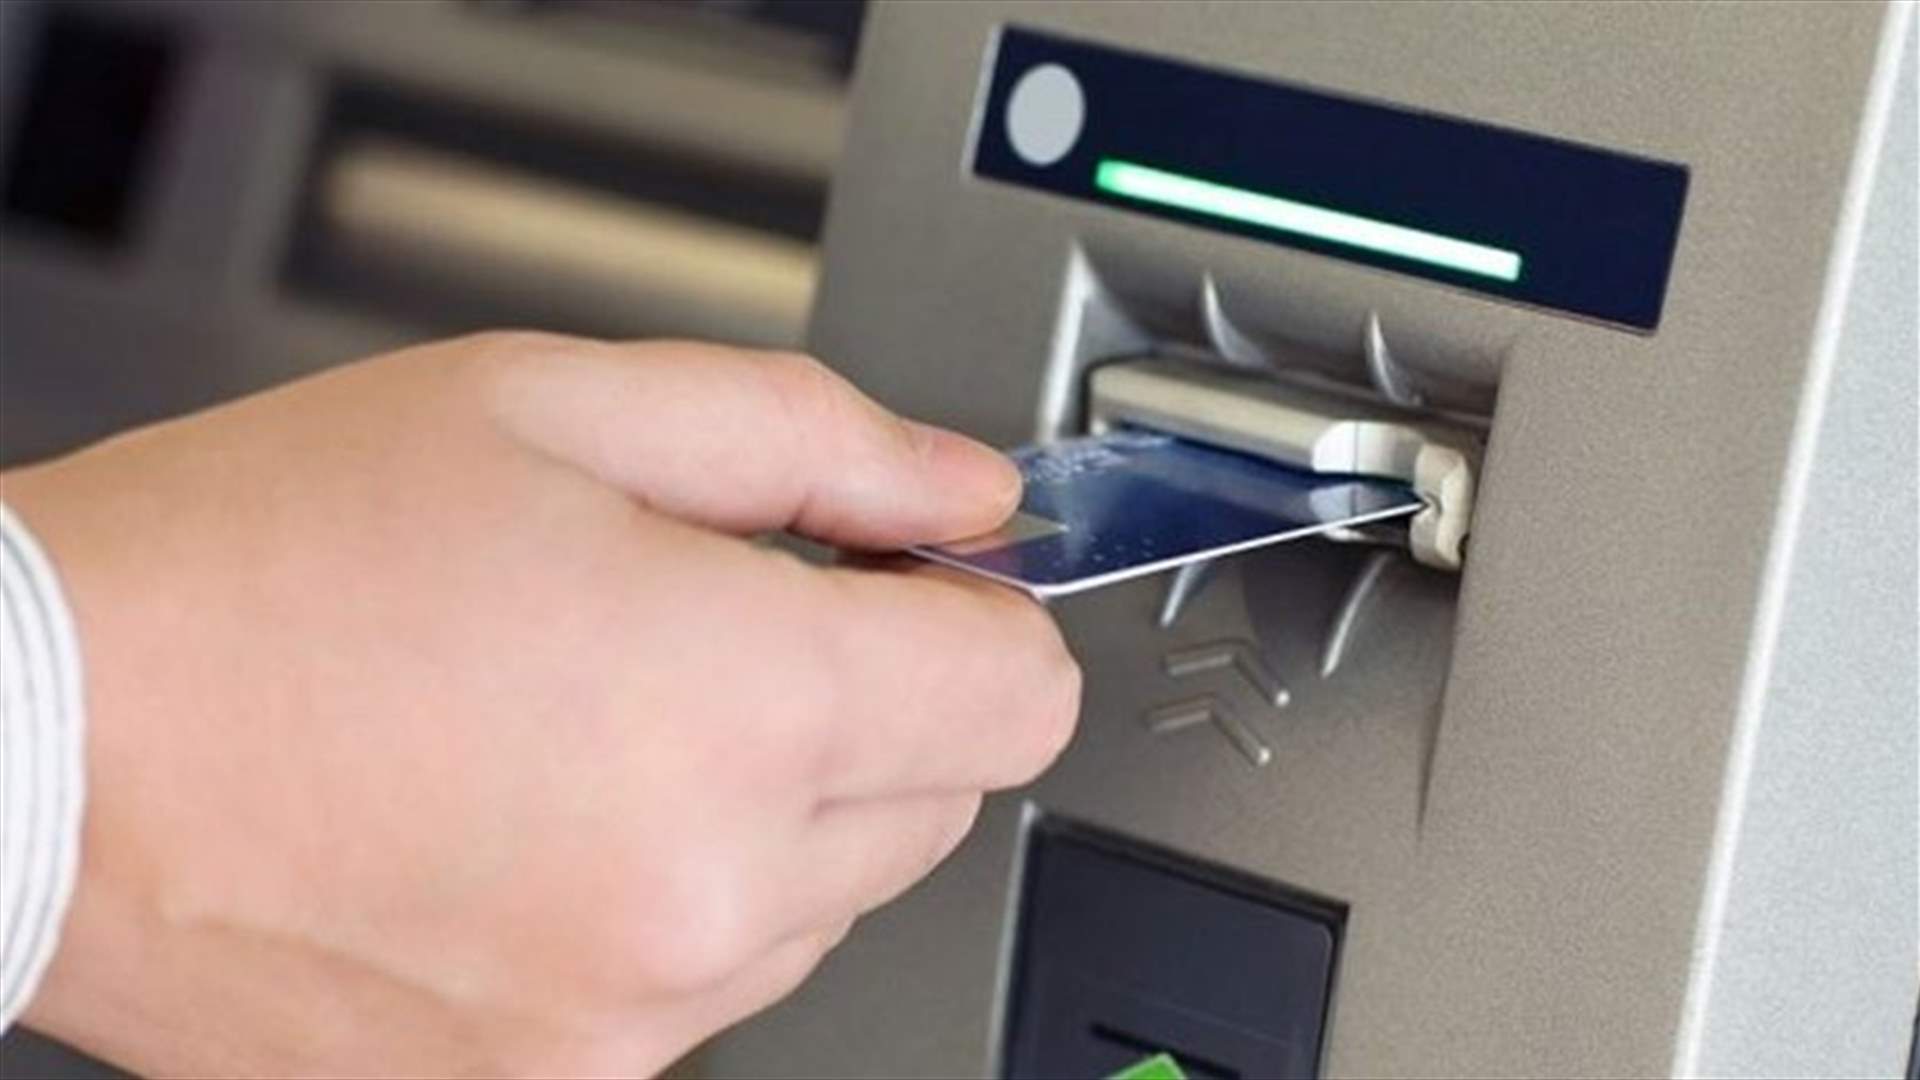 BDL provides banks with money to meet needs of citizens through ATMs